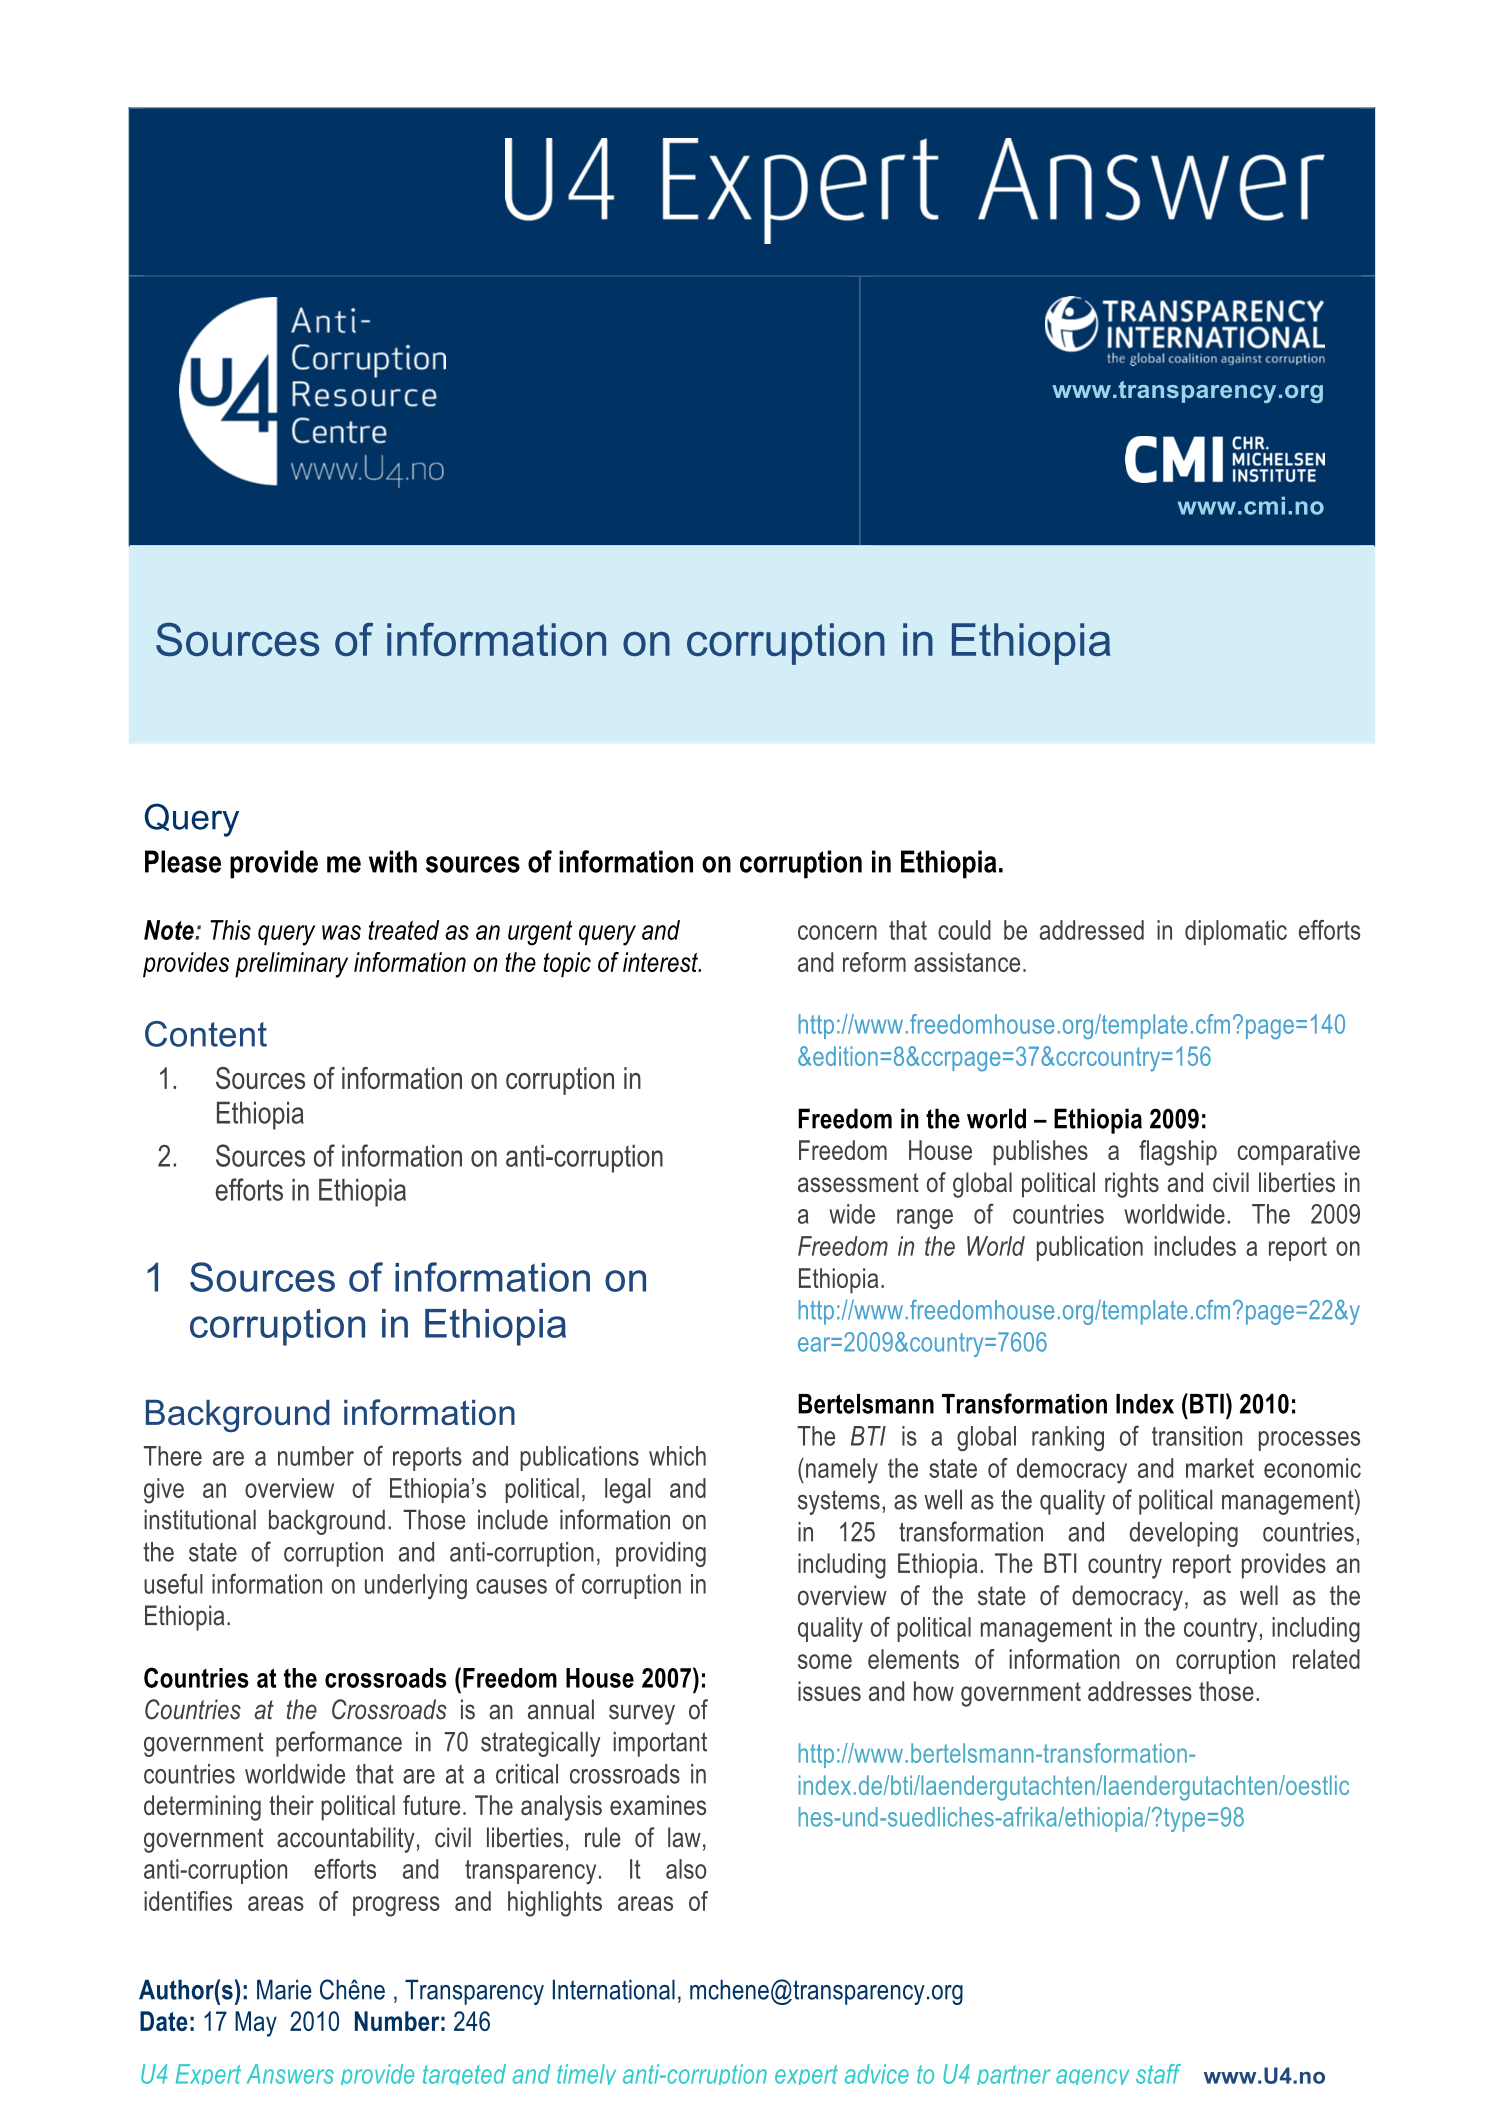 Sources of information on corruption in Ethiopia